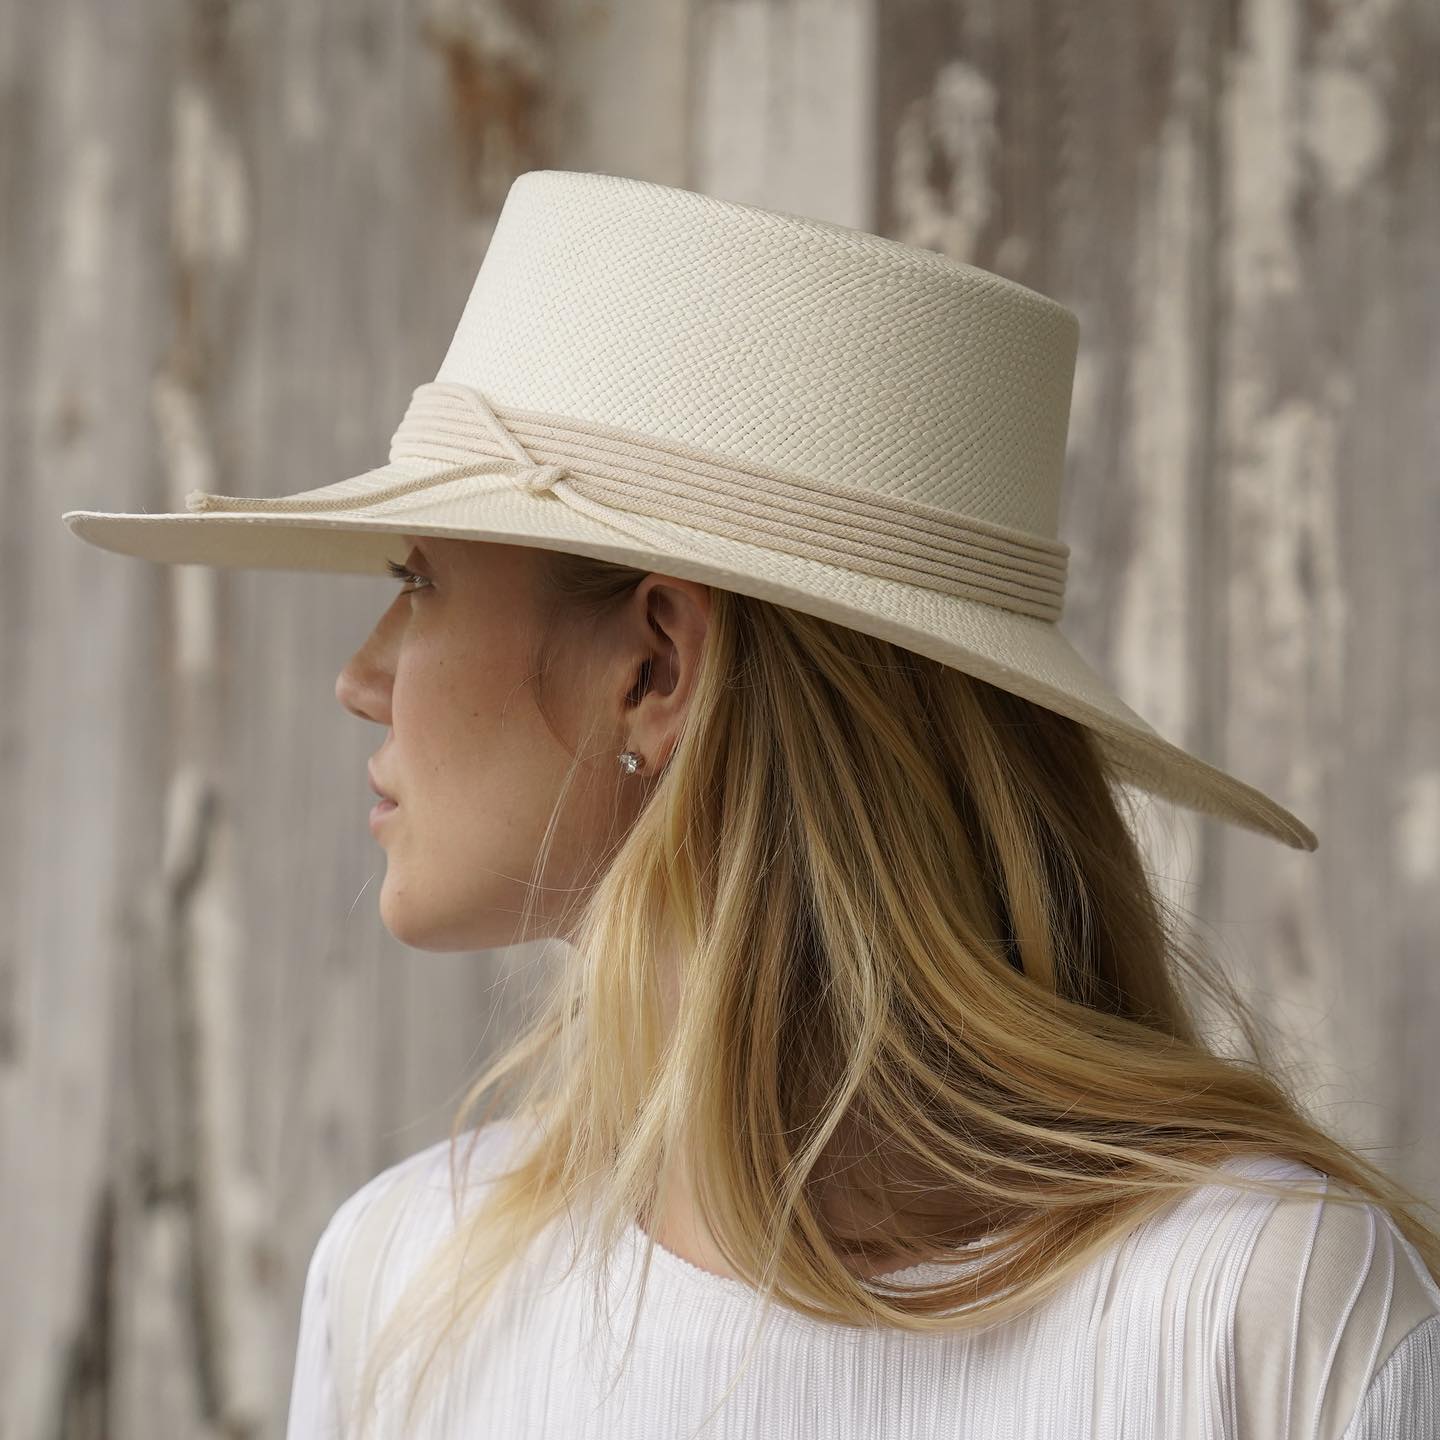 White Panama hat for Women with Wide Brim